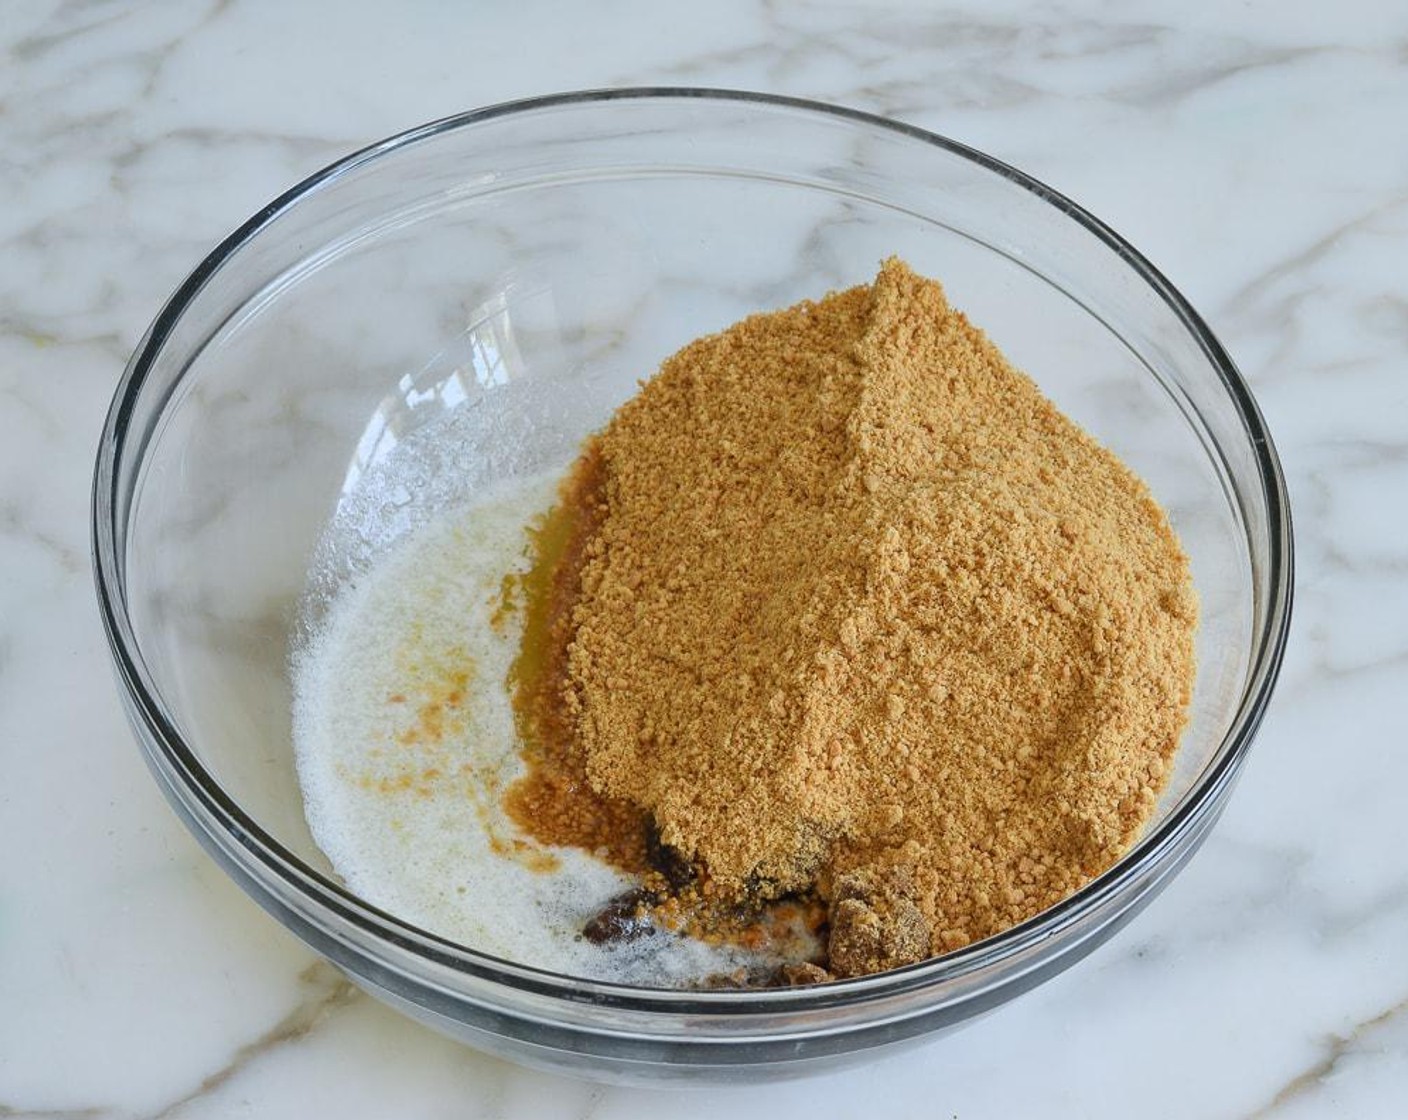 step 2 In a medium bowl, combine the Graham Cracker Crumbs (1 cup), Unsalted Butter (1/4 cup), Dark Brown Sugar (1/4 cup), and Salt (1 pinch). Using a spoon first and then your fingers, mix until evenly combined, making sure to break up any lumps of brown sugar.